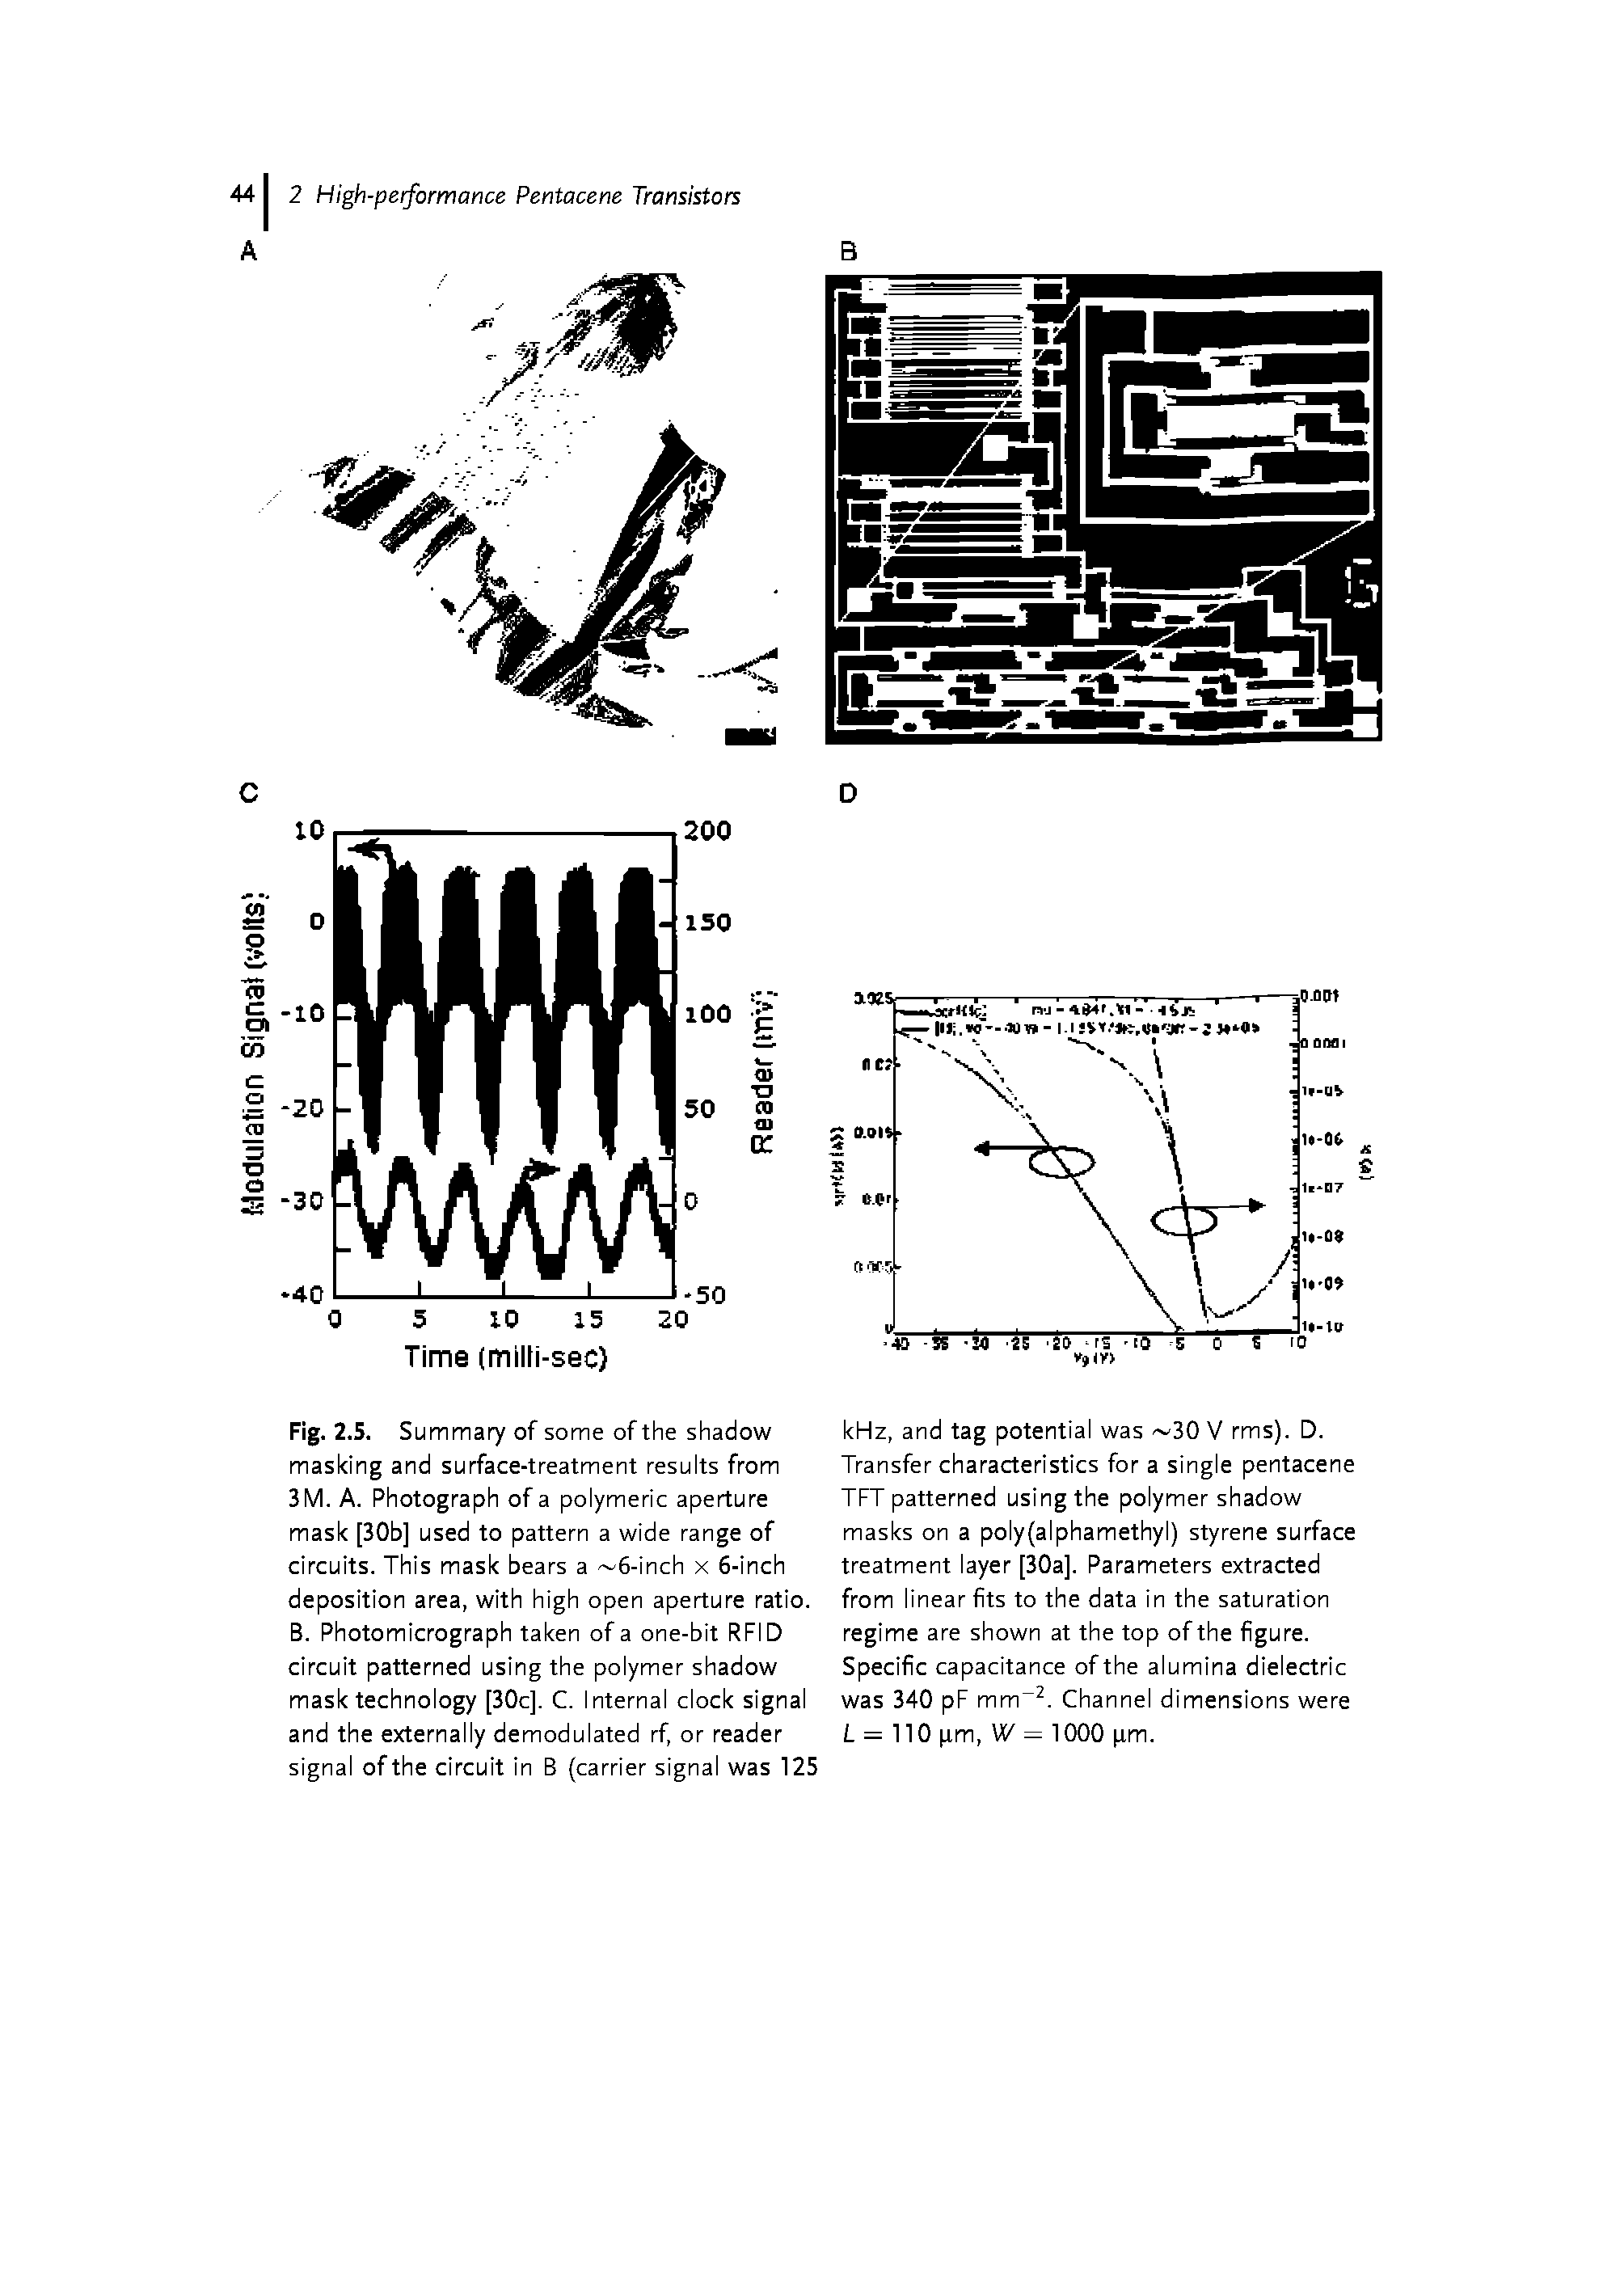 Fig. 2.S. Su mmary of some of the shadow masking and surface-treatment results from 3M. A. Photograph of a polymeric aperture mask [30b] used to pattern a wide range of circuits. This mask bears a 6-inch x 6-inch deposition area, with high open aperture ratio. B. Photomicrograph taken of a one-bit RFID circuit patterned using the polymer shadow mask technology [30c], C. Internal clock signal and the externally demodulated rf, or reader signal of the circuit in B (carrier signal was 125...